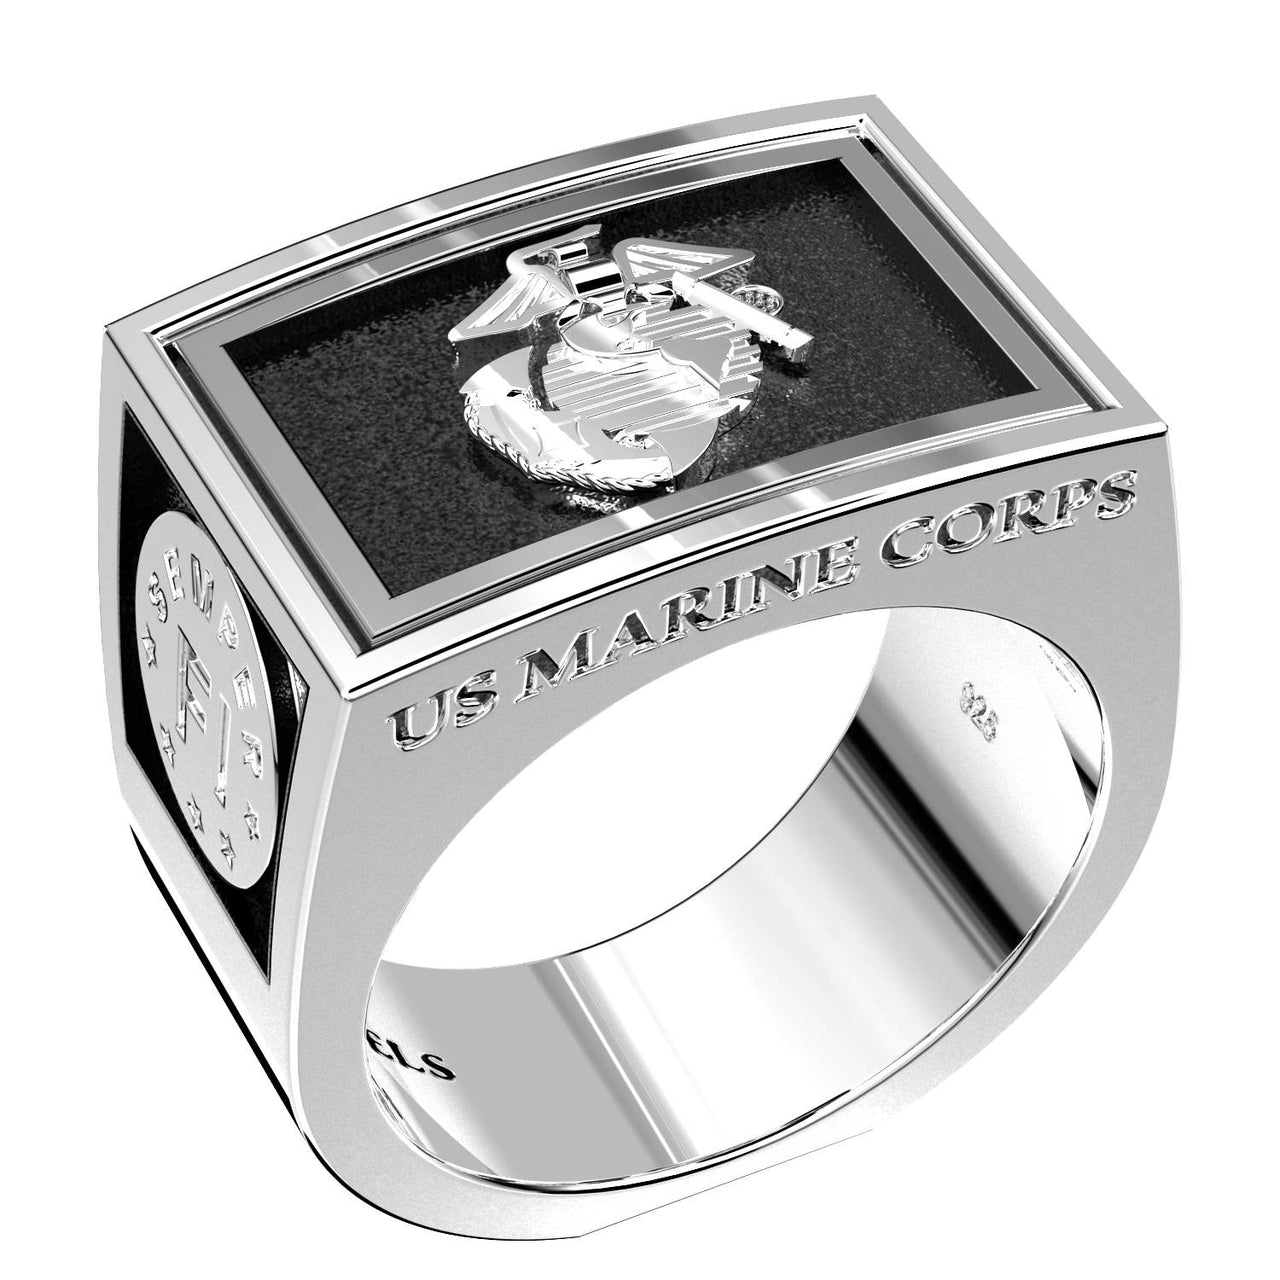 Men's Heavy 925 Sterling Silver US Marine Corps USMC Ring Band